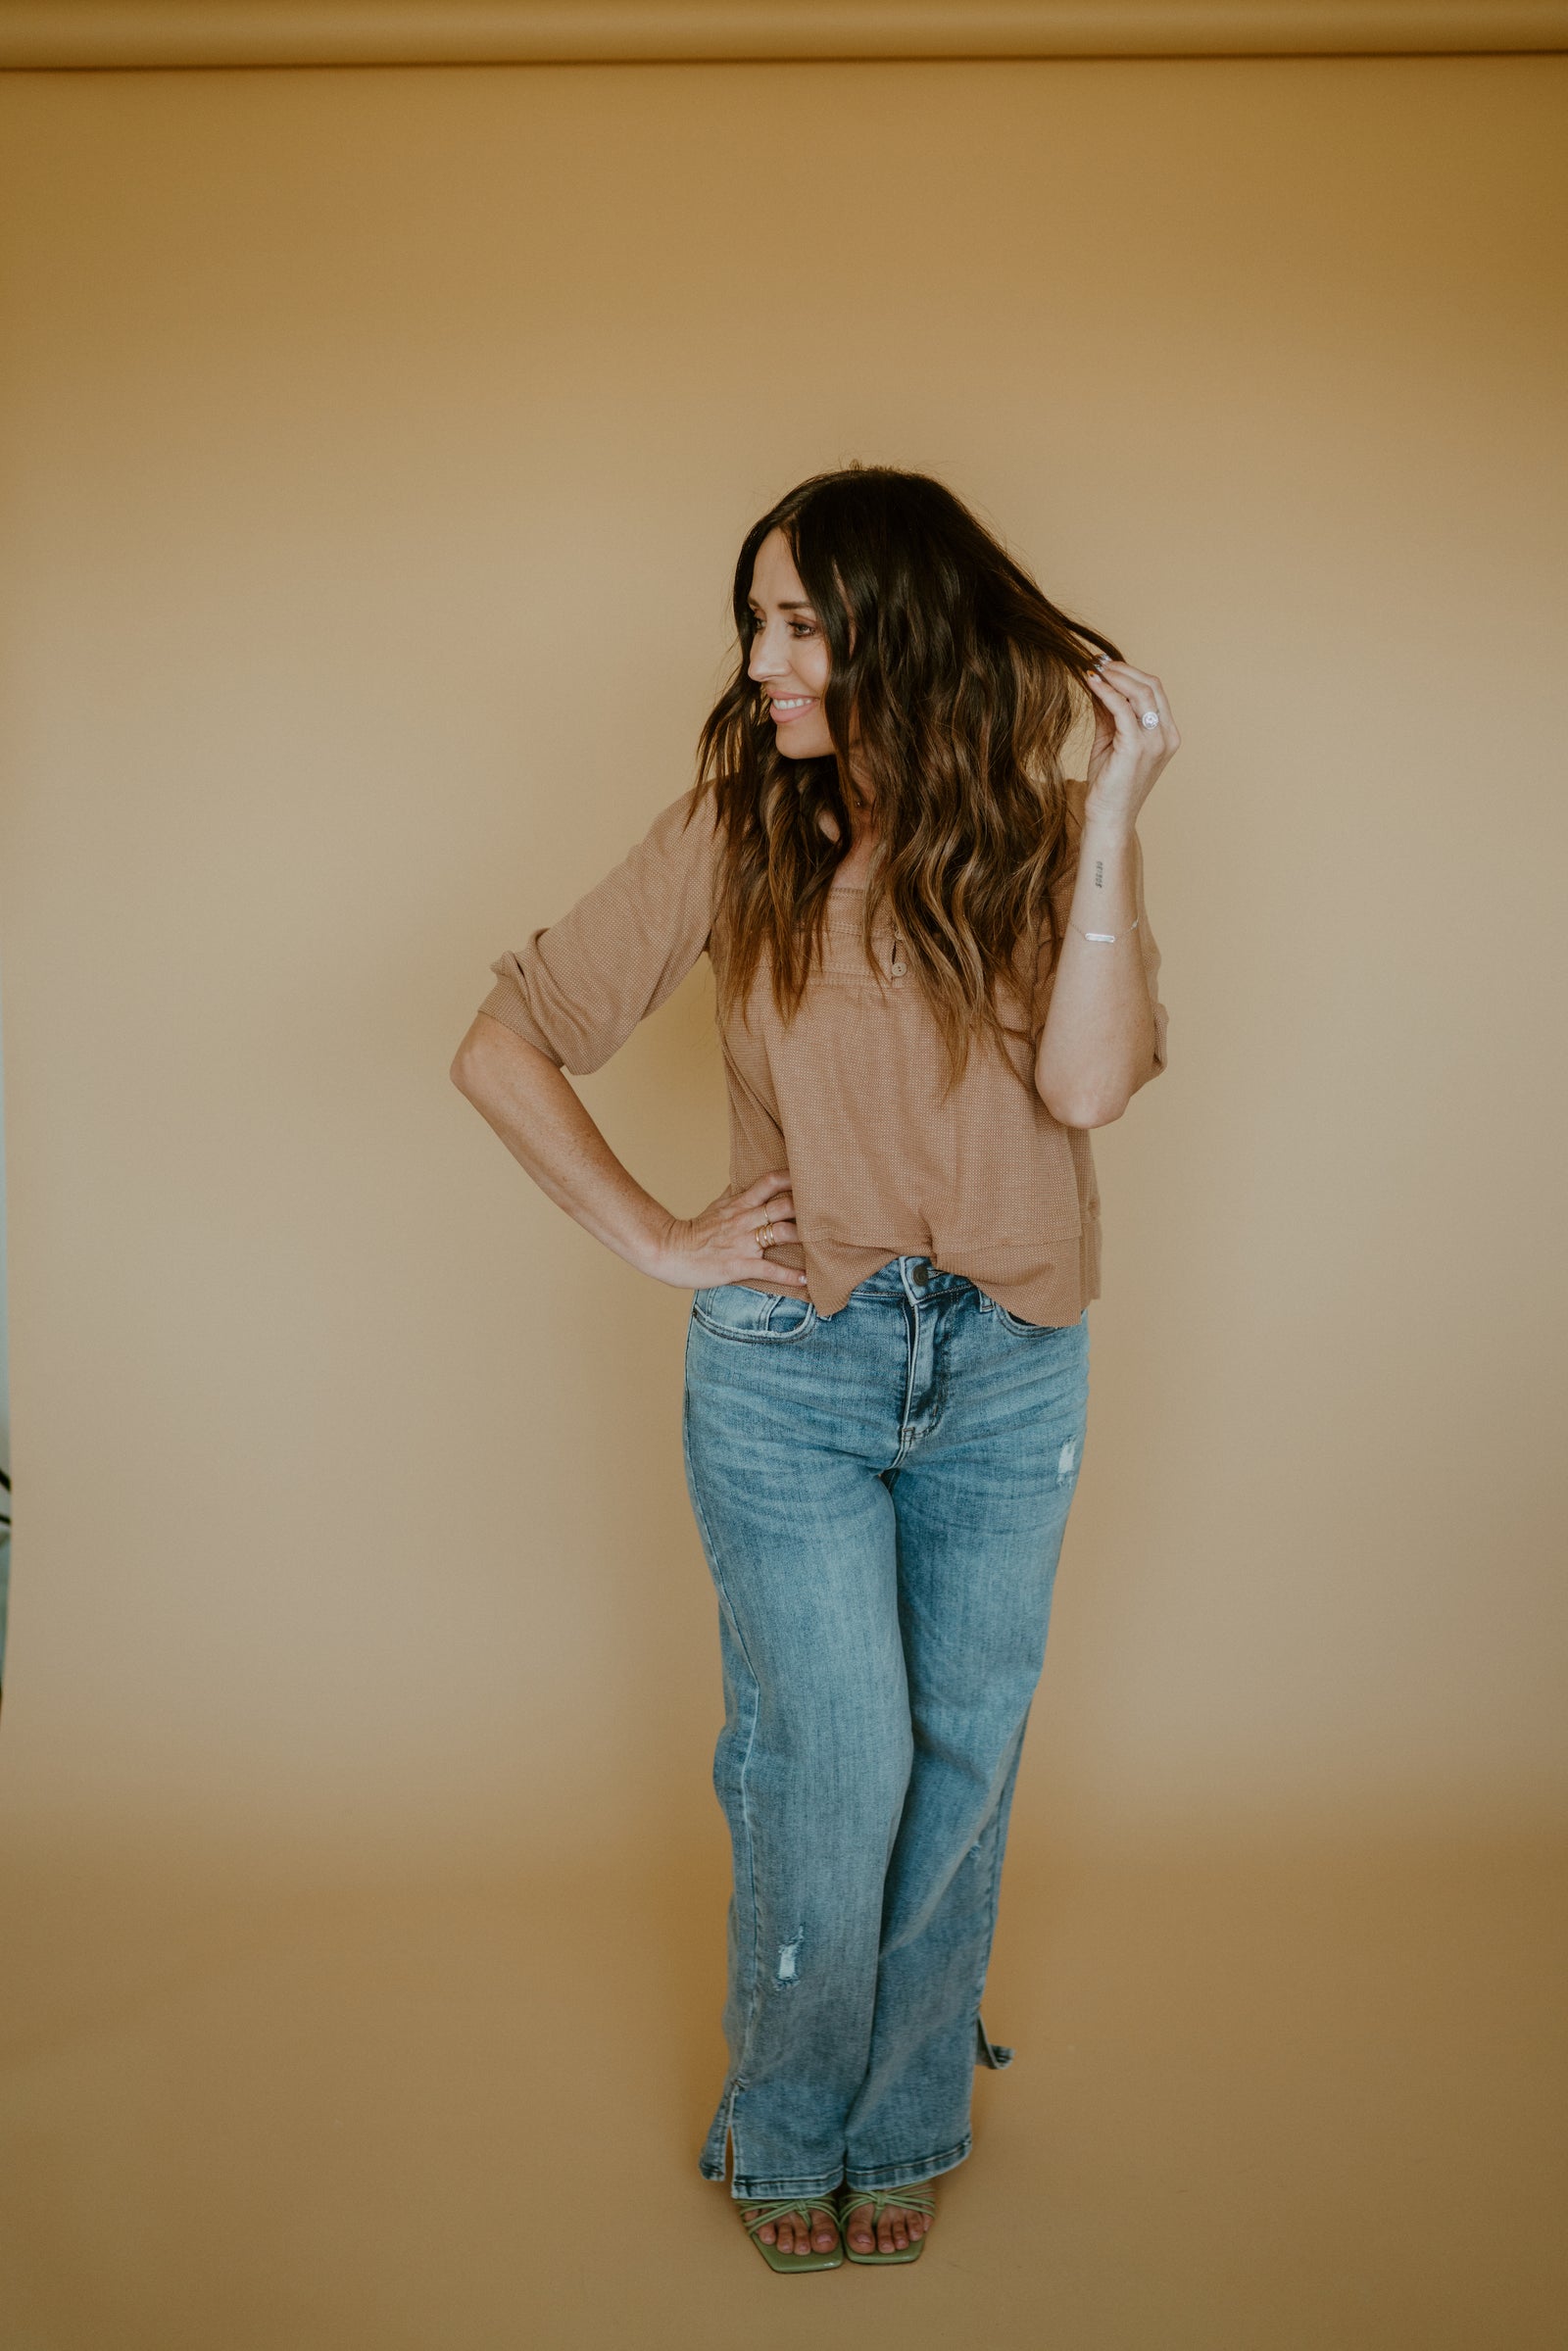 Robin Jeans | Extended Sizing - FINAL SALE